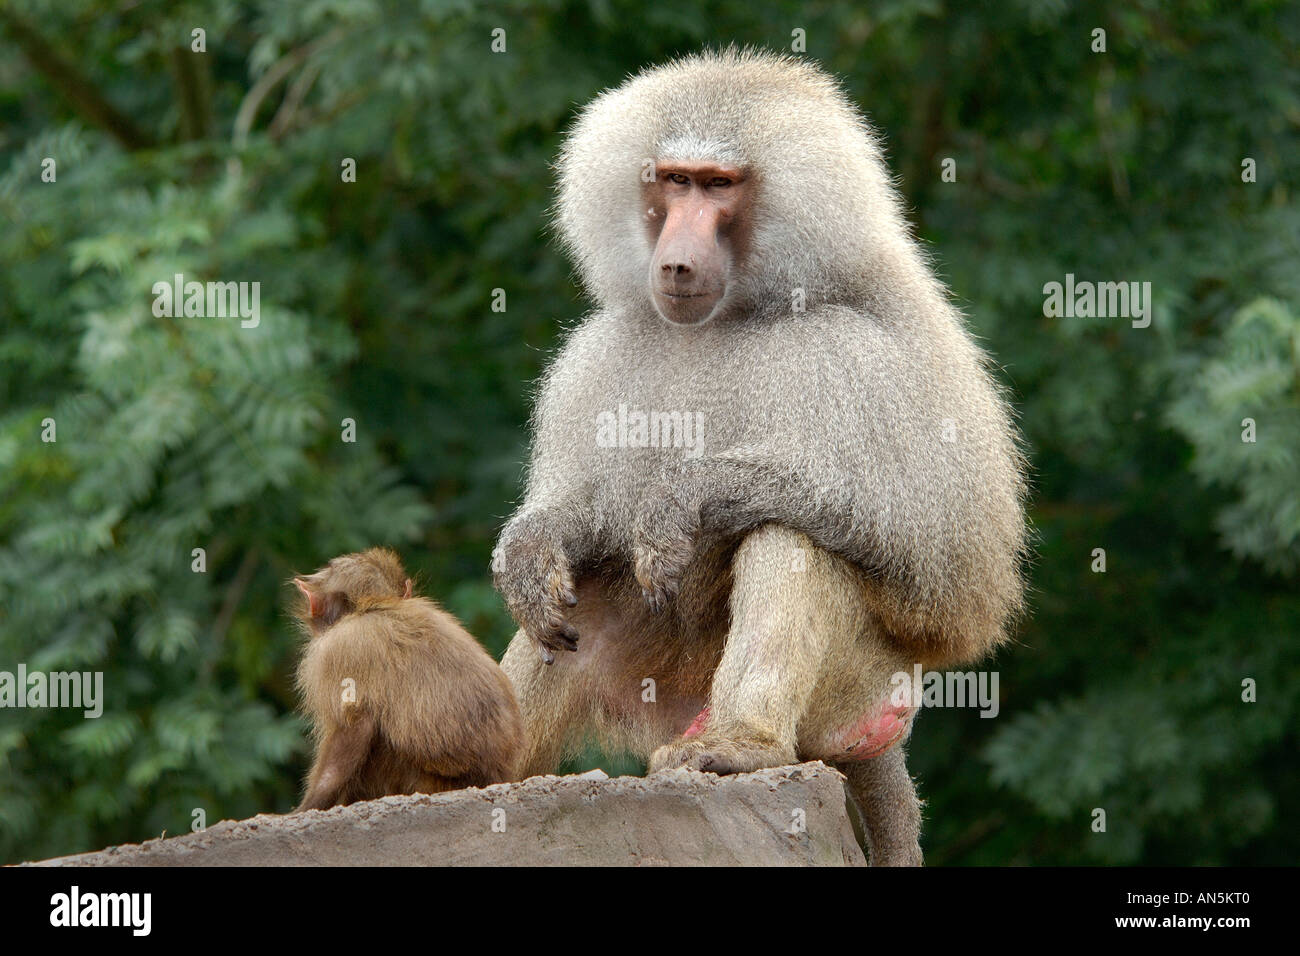 Intimate close up portrait of a male Hamadryas Baboon Papio hamadryas watching over its young with nicely blurred background Stock Photo